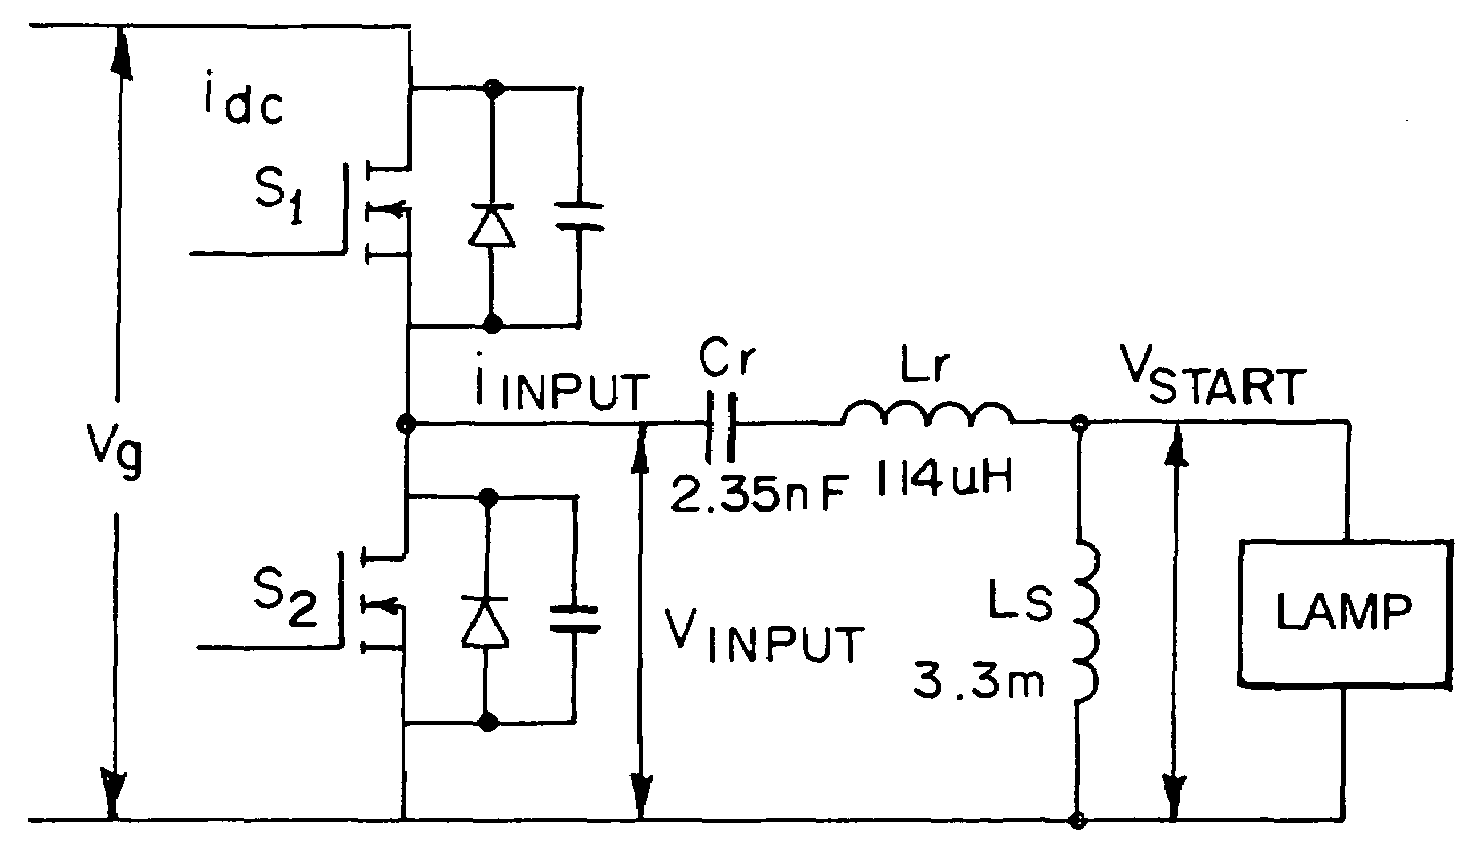 Soft-switching techniques for power inverter legs